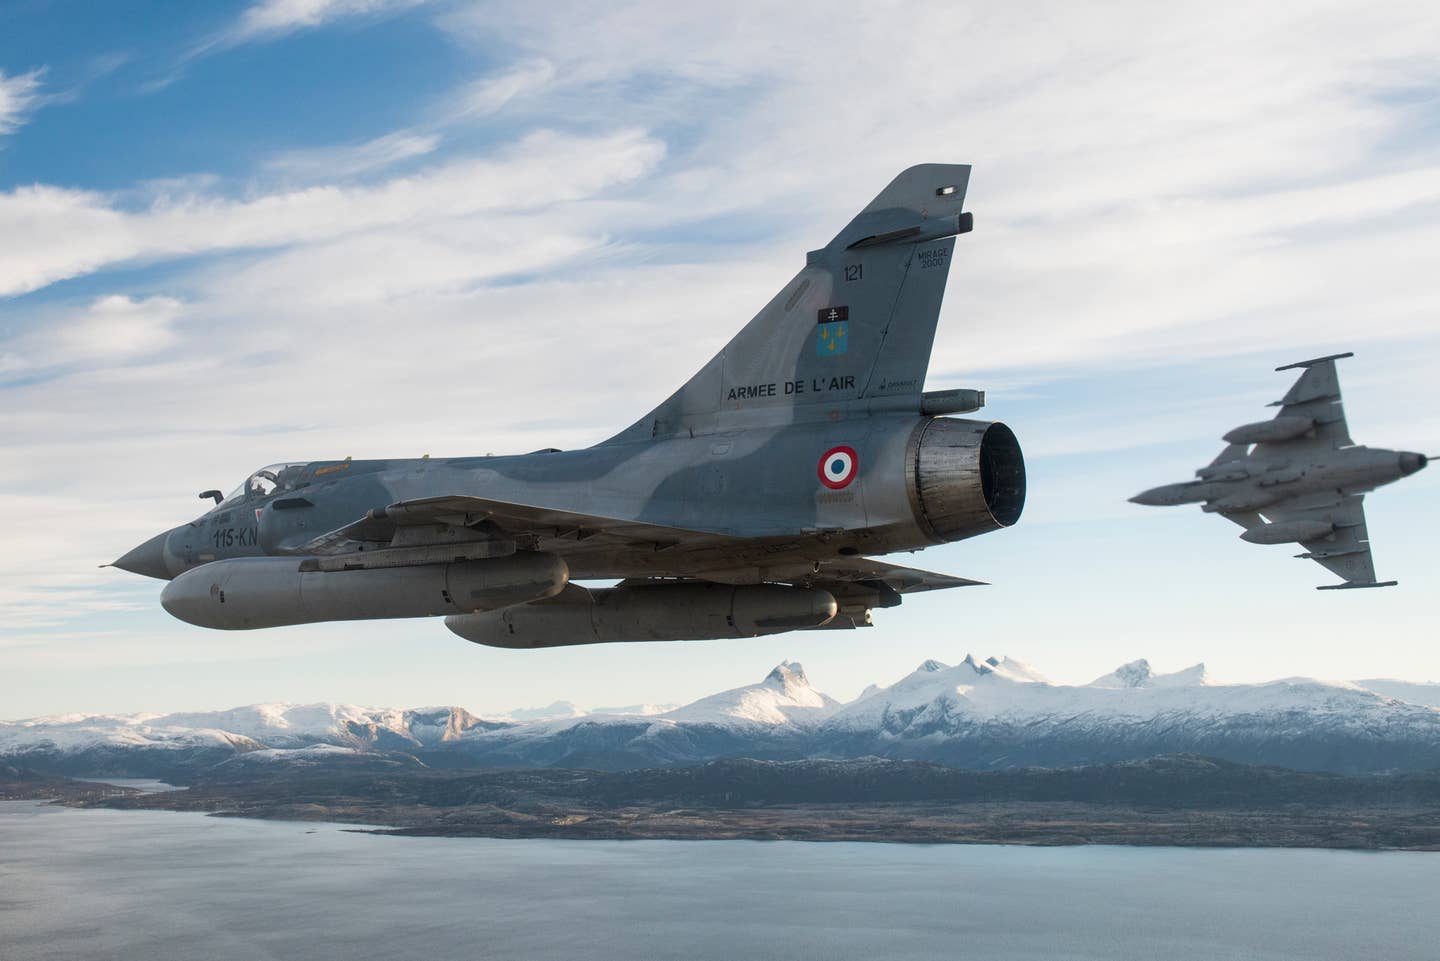 A Swedish Saab Gripen breaks from formation with a Mirage 2000C in Norwegian airspace during Exercise Trident Juncture 2018. <em>Jean-Luc Brunet / Armée de l'Air / Défense</em>